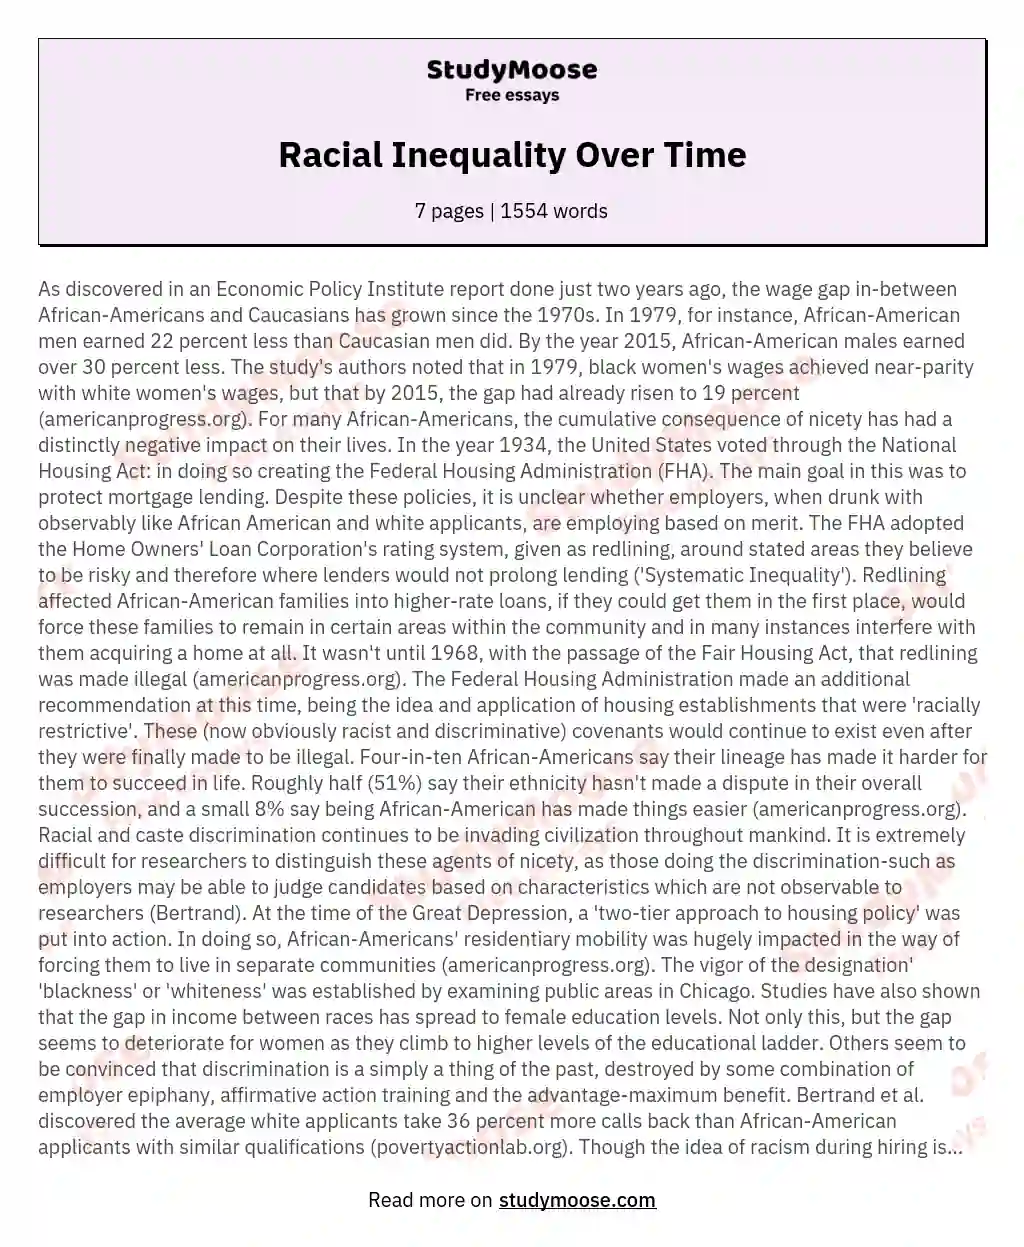 Racial Inequality Over Time essay